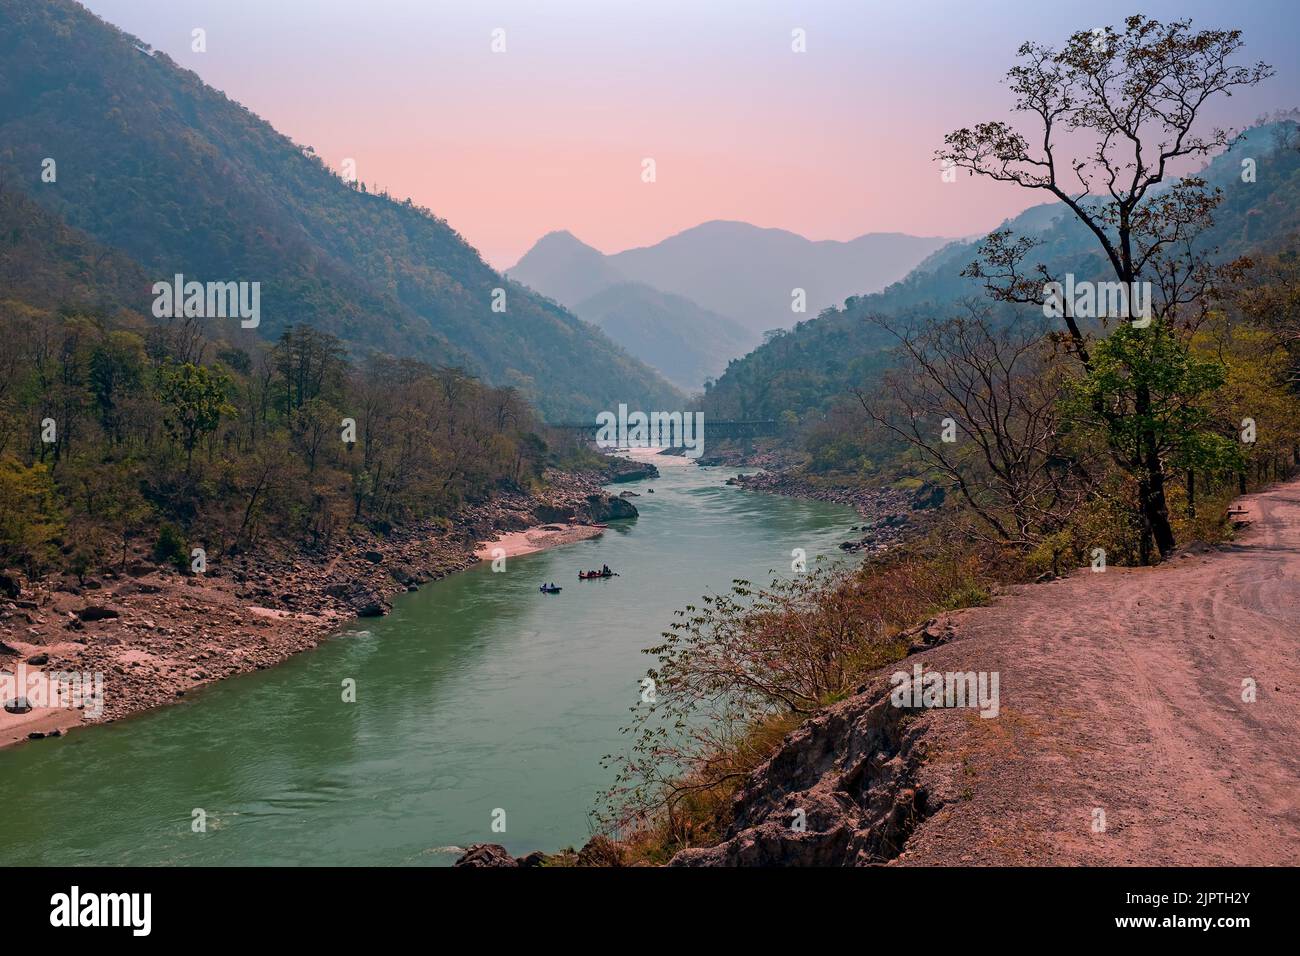 Ganga river in the Himalayas in India Asia at sunset Stock Photo